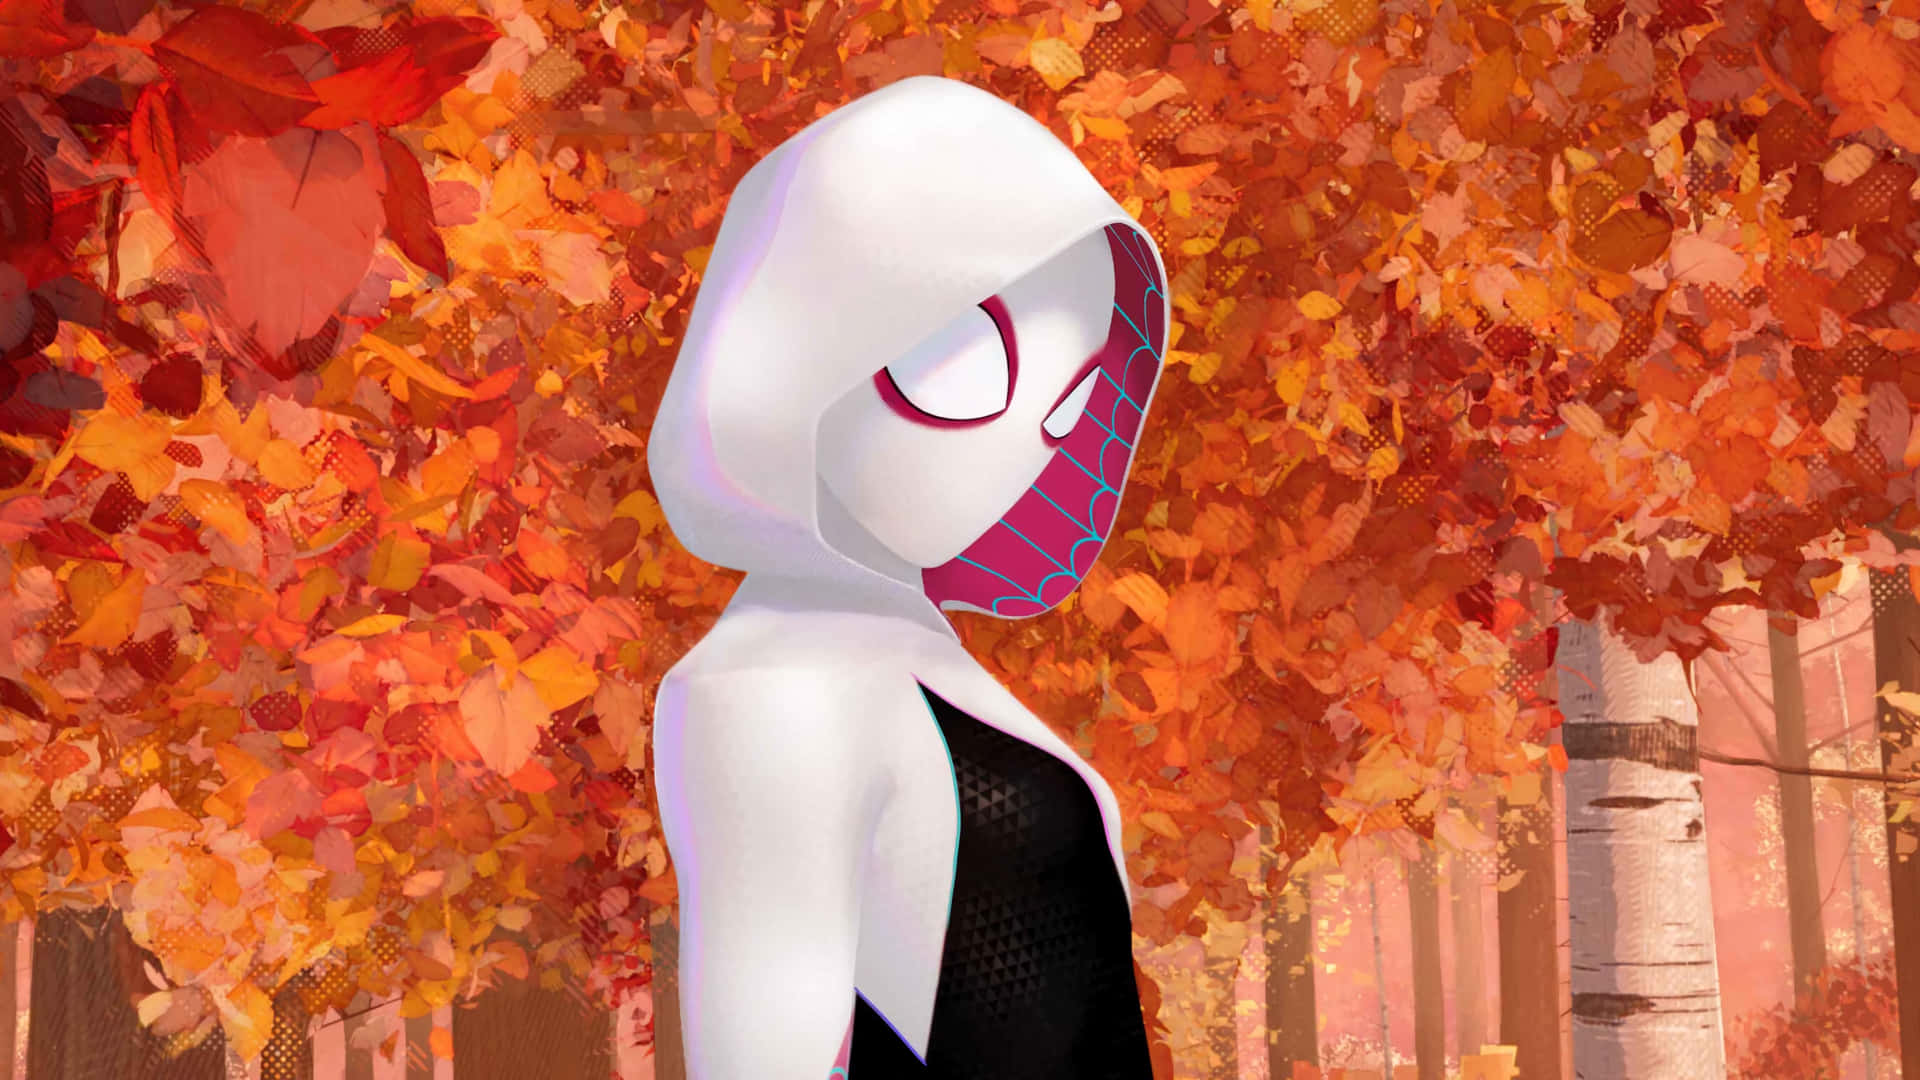 Spider Gwen takes a break from crime fighting